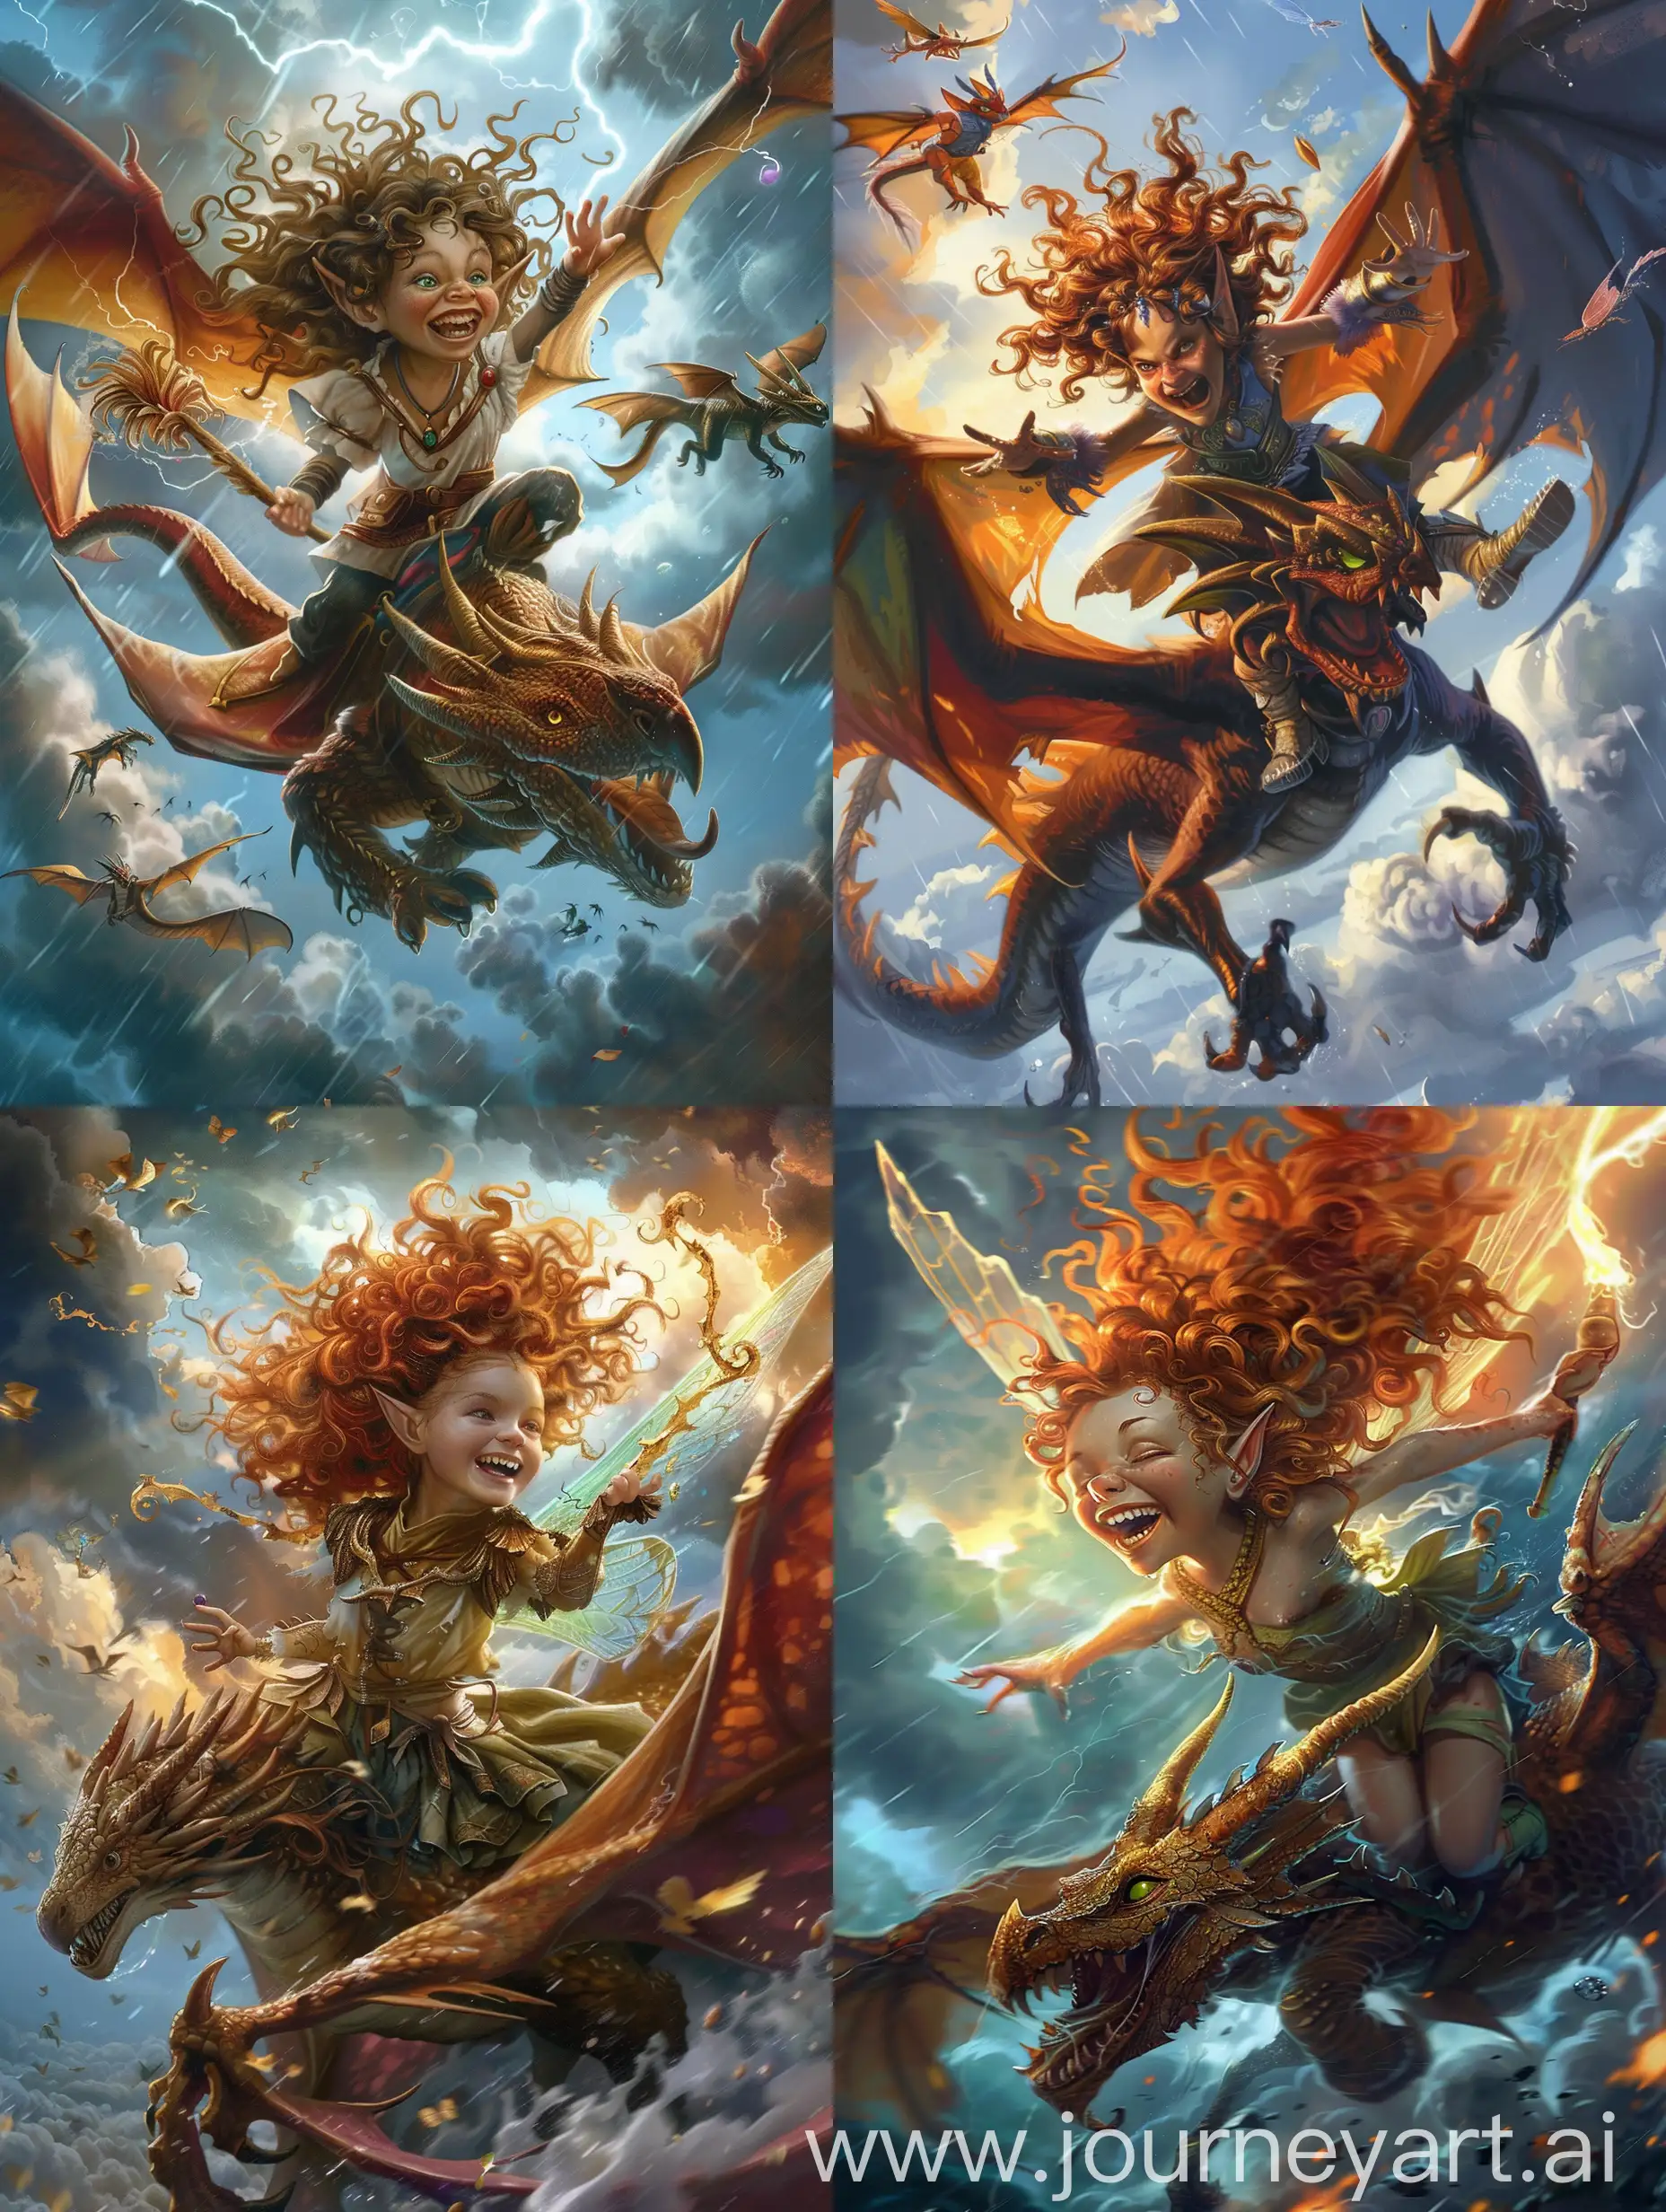 A mischievous fairy with wild, curly hair and a mischievous grin, riding on the back of a dragon through a stormy sky, casting spells and causing chaos.